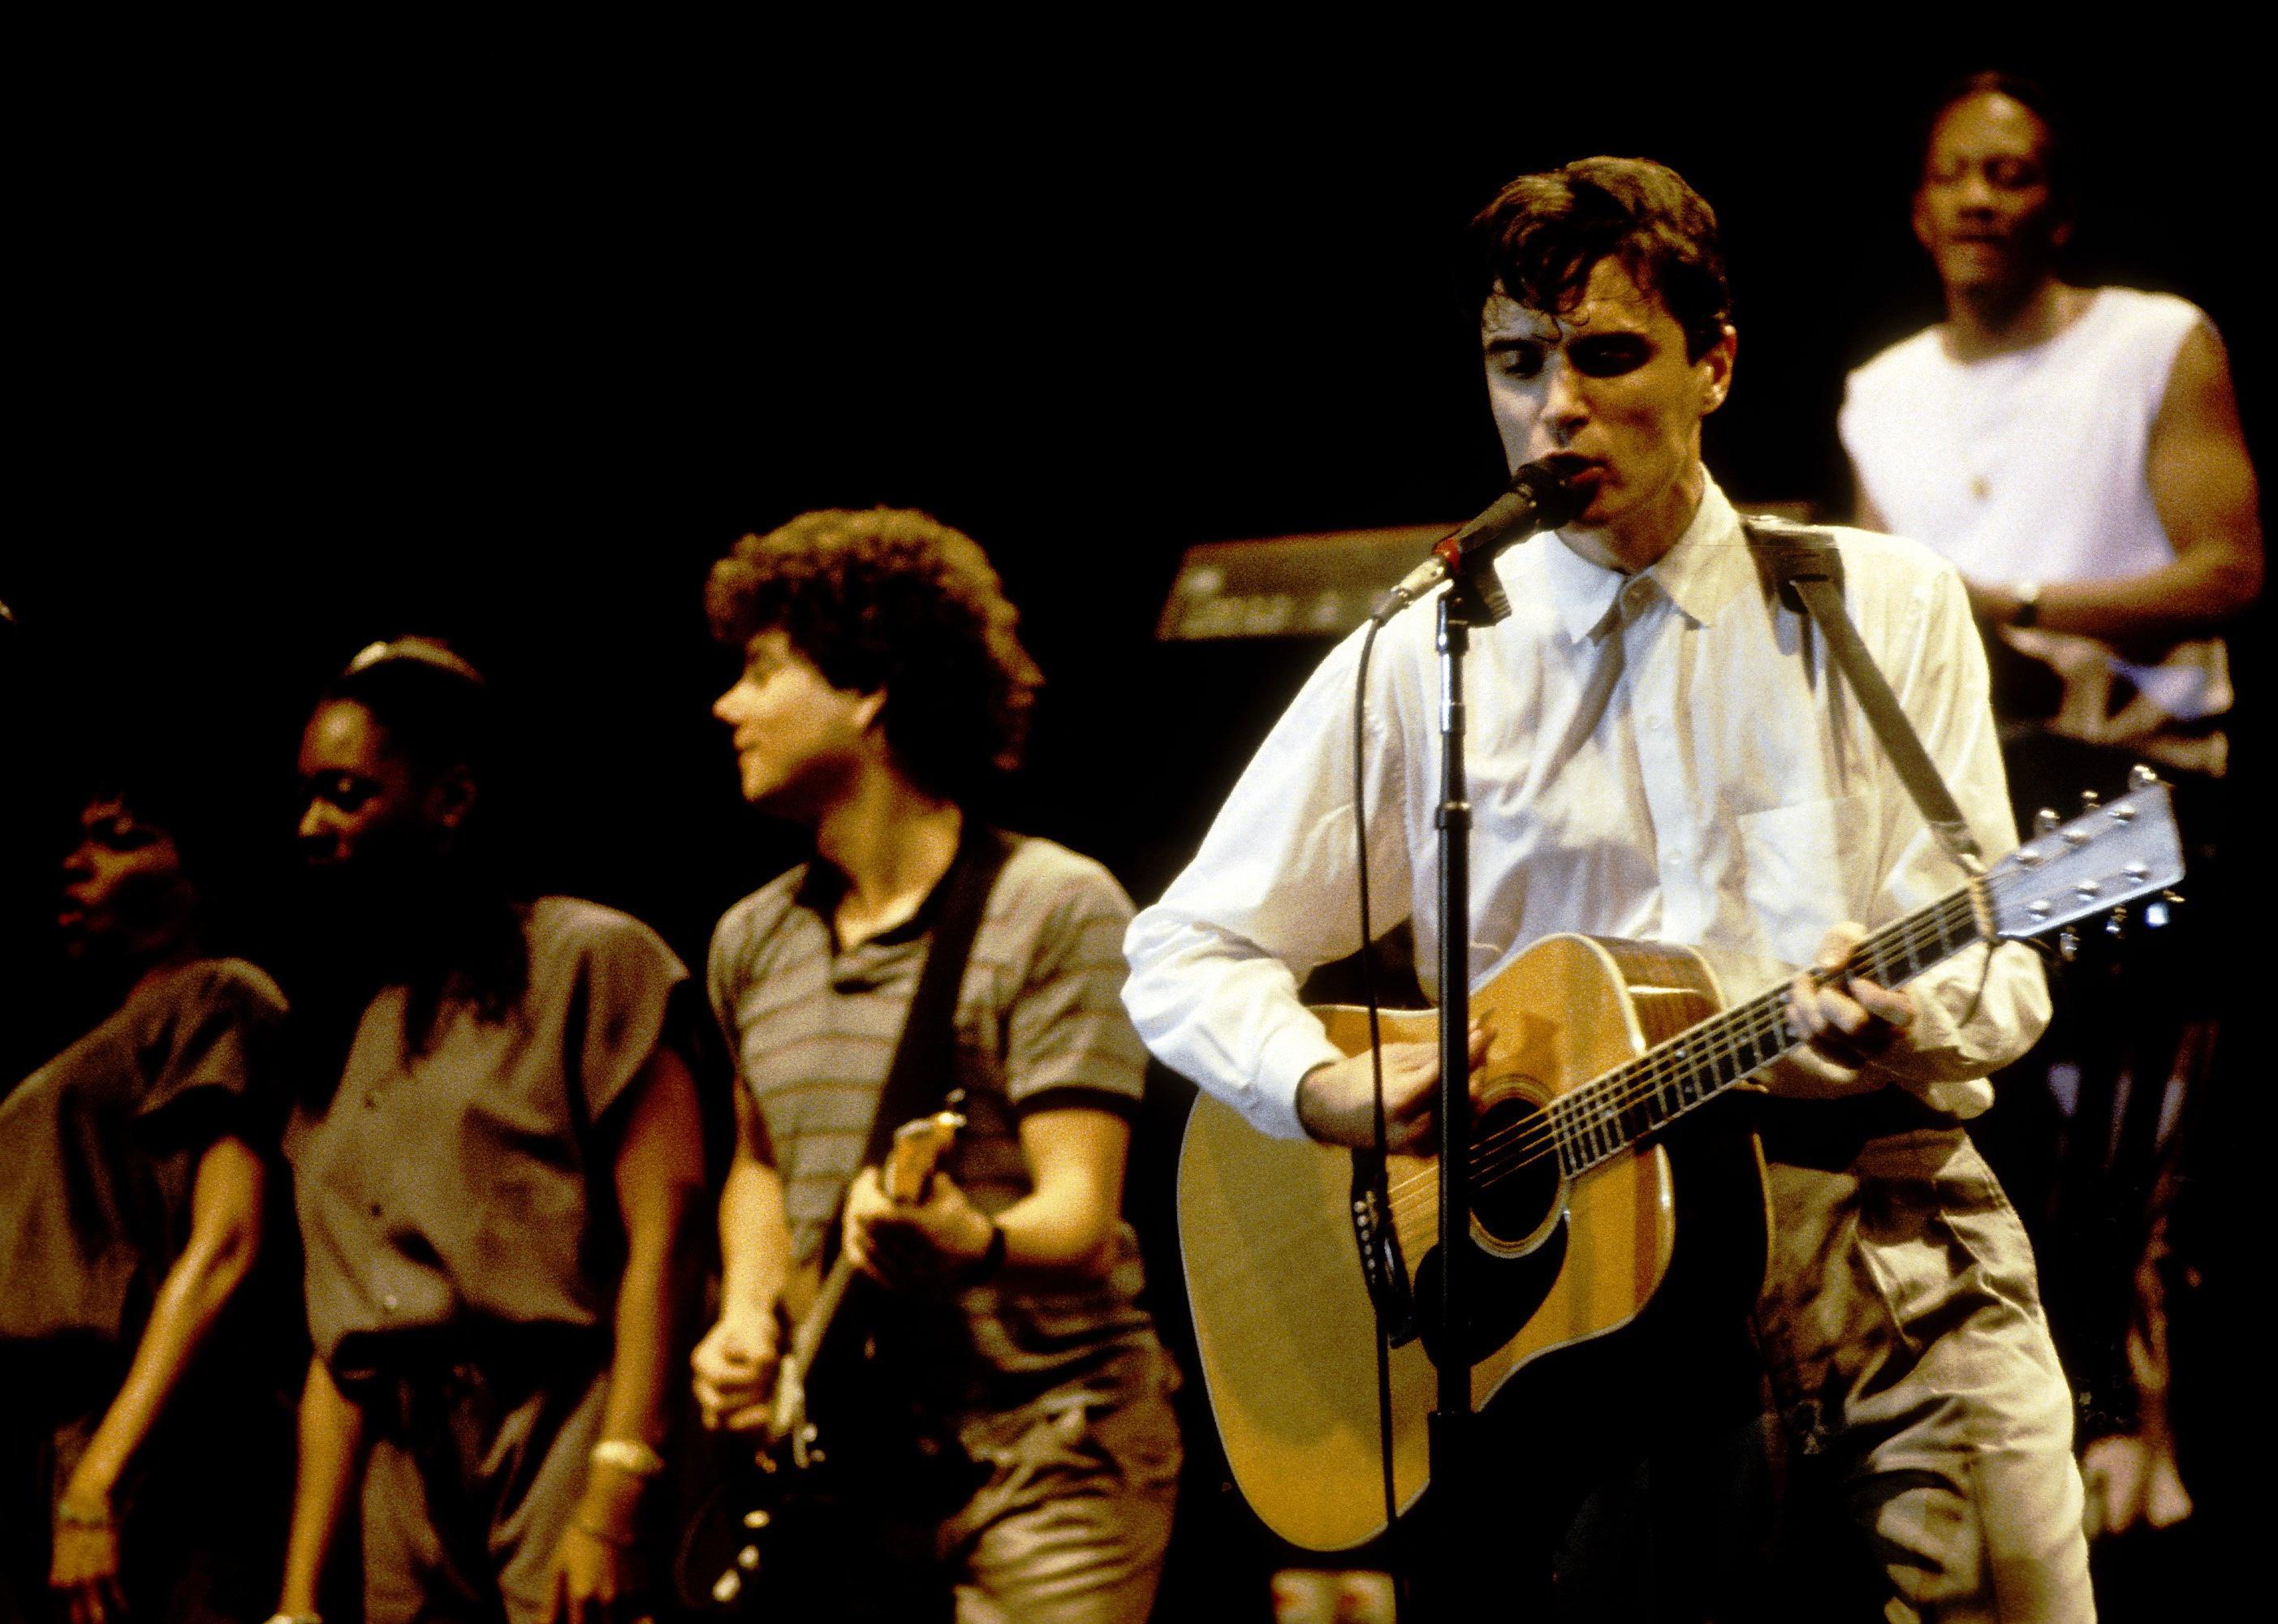 Jerry Harrison and David Byrne performs with 'the Talking Heads'.